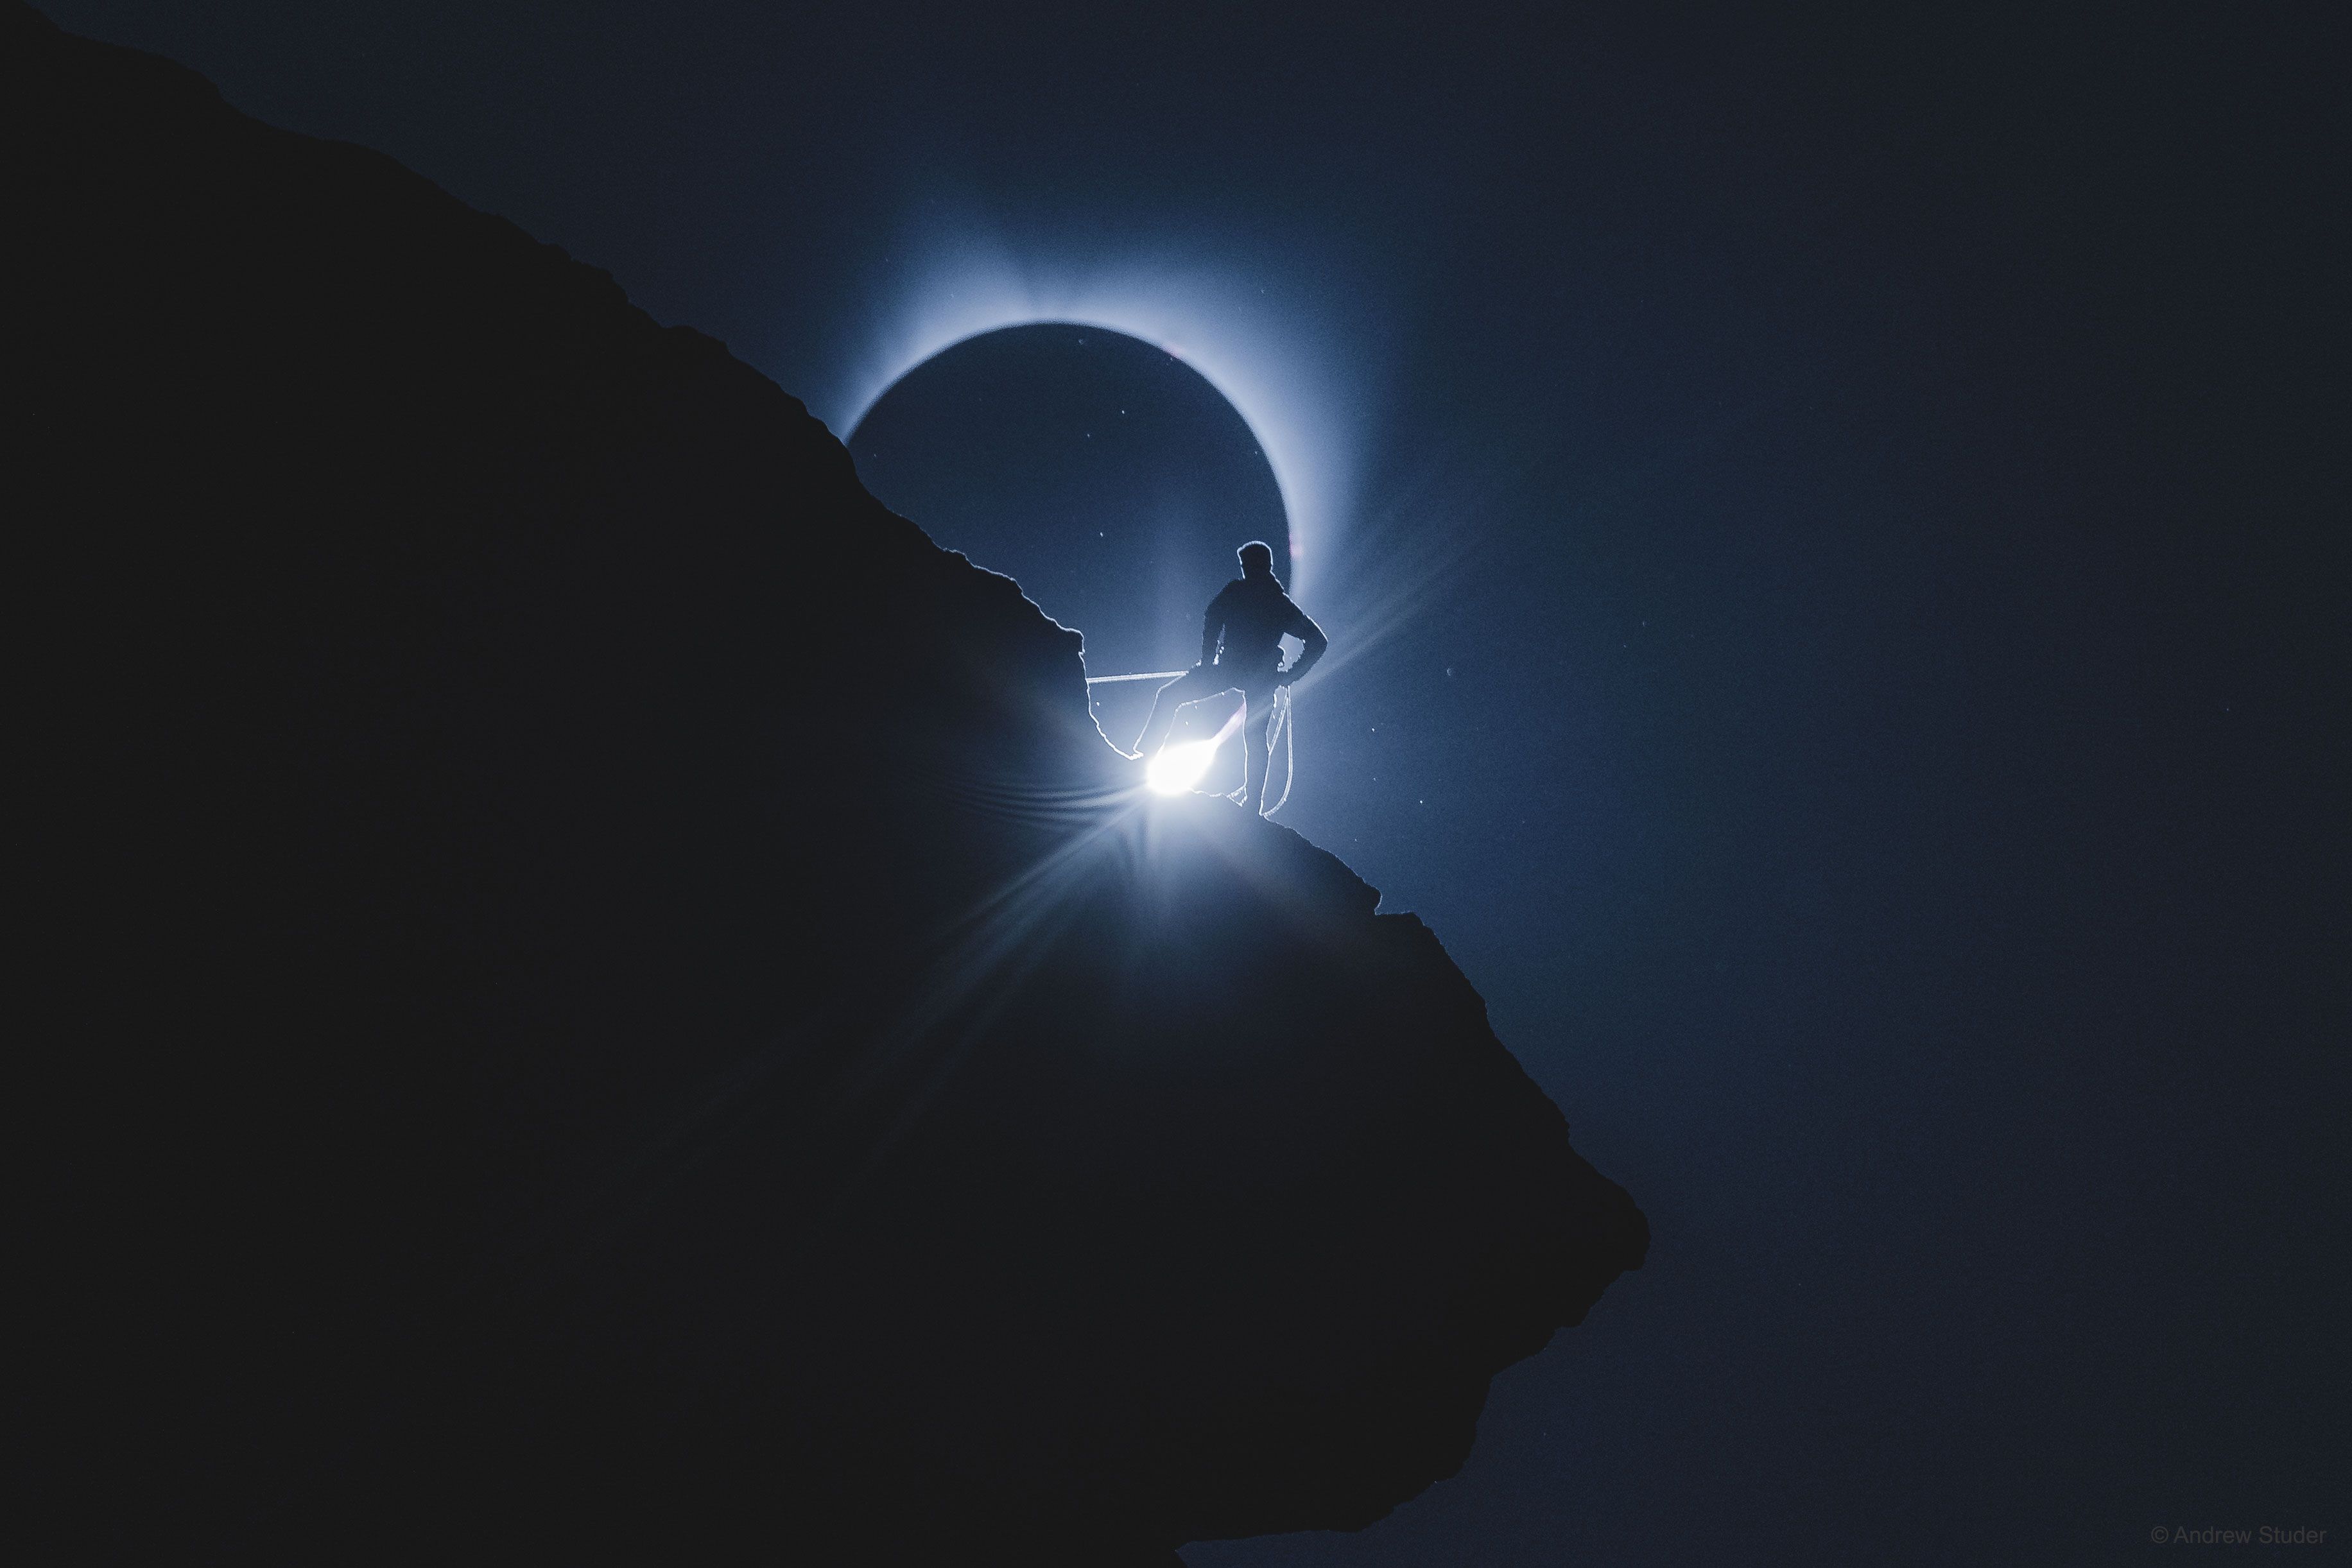  The Climber and the Eclipse 